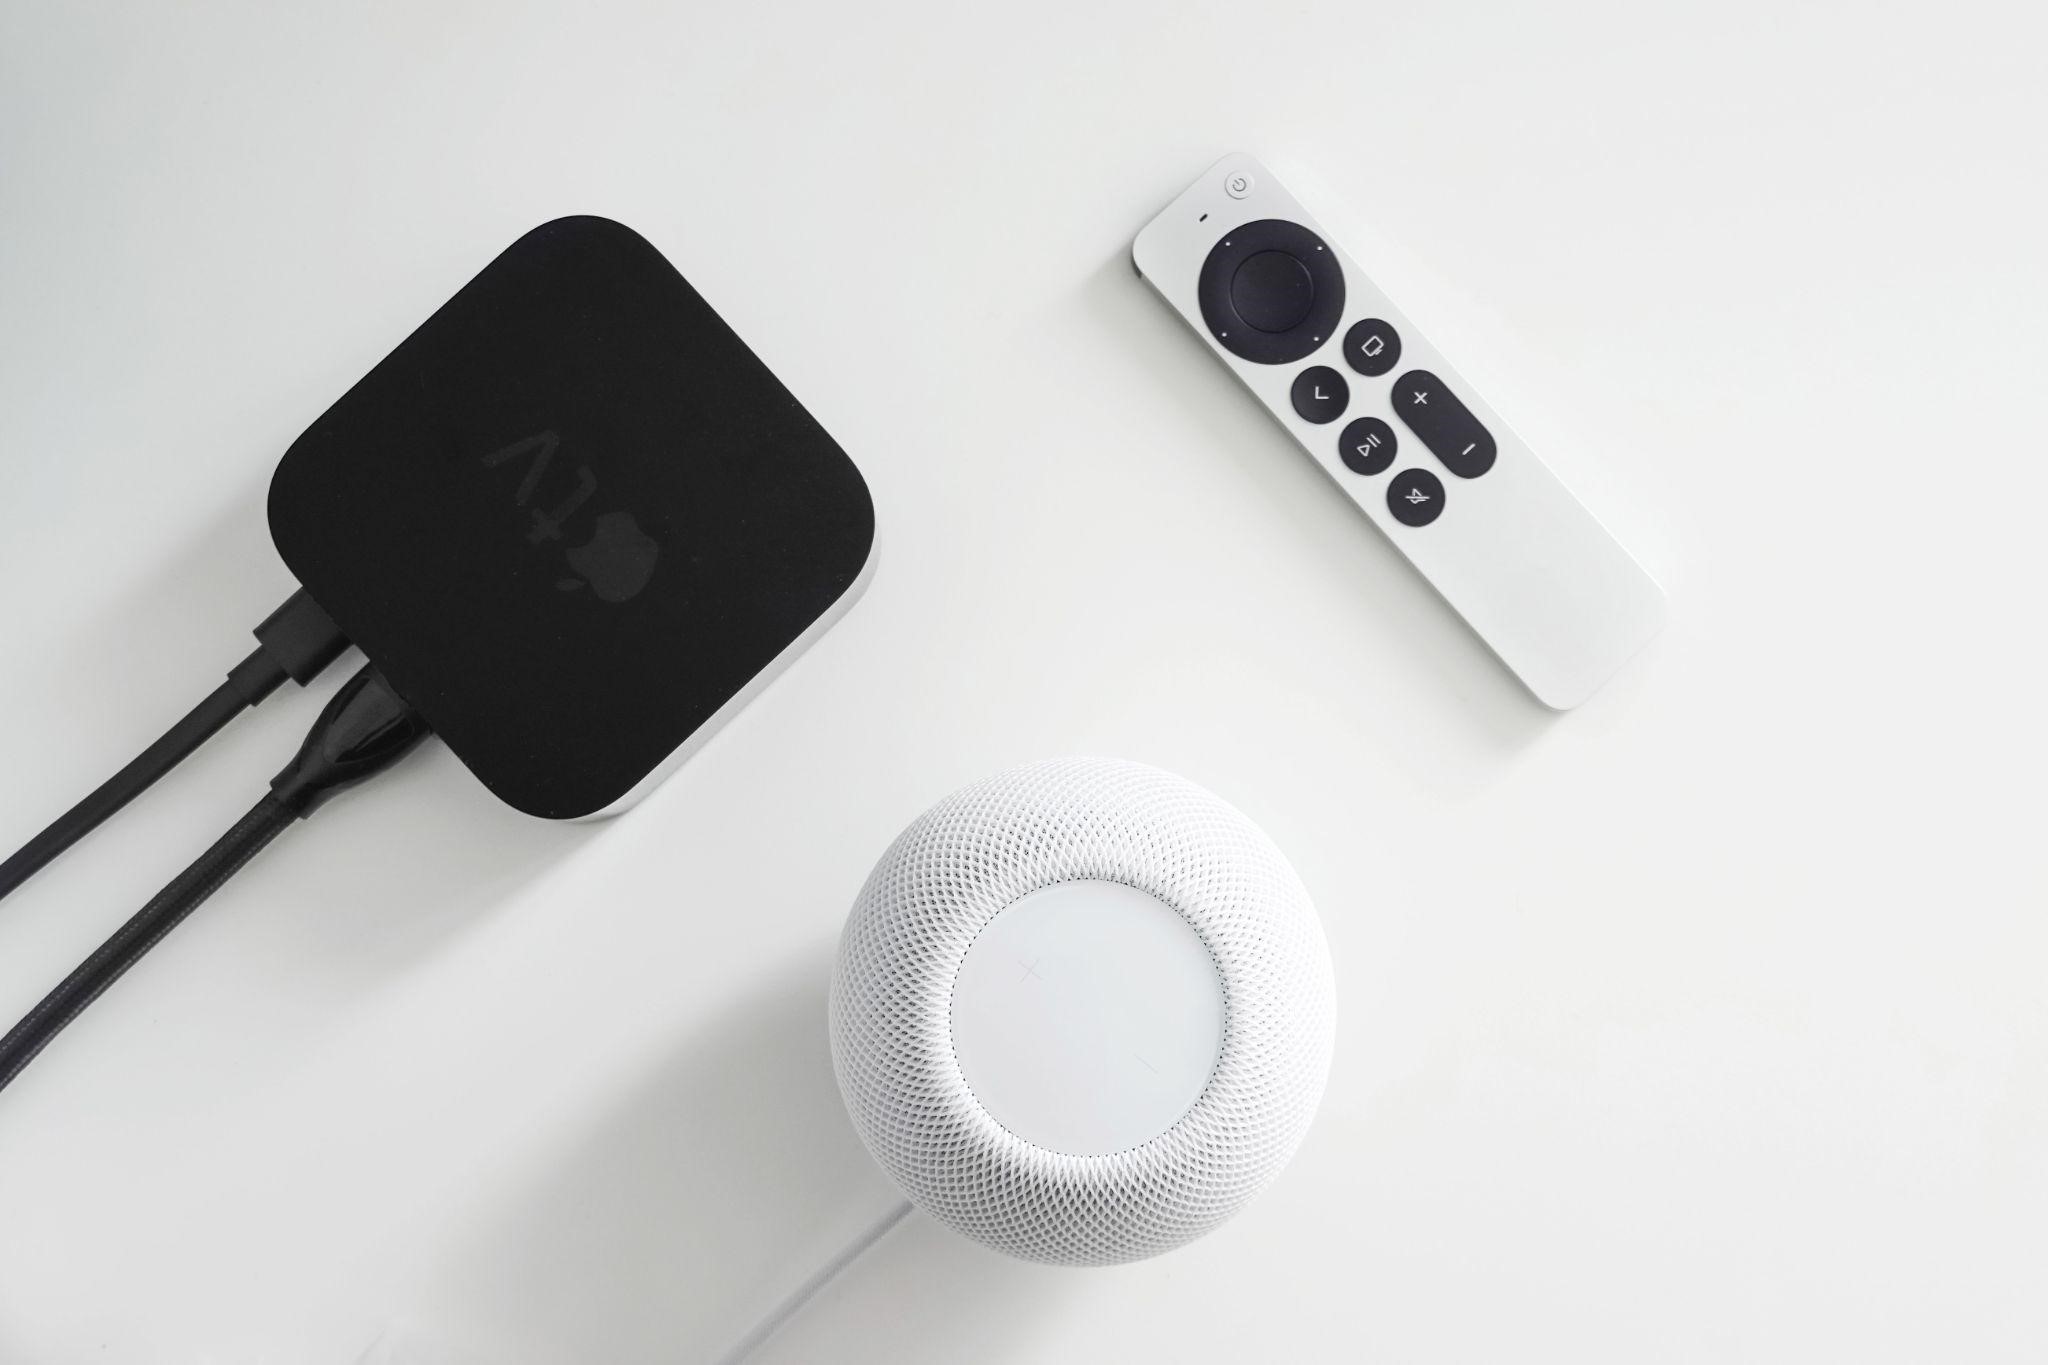 How to Connect HomePod to Wi-Fi?